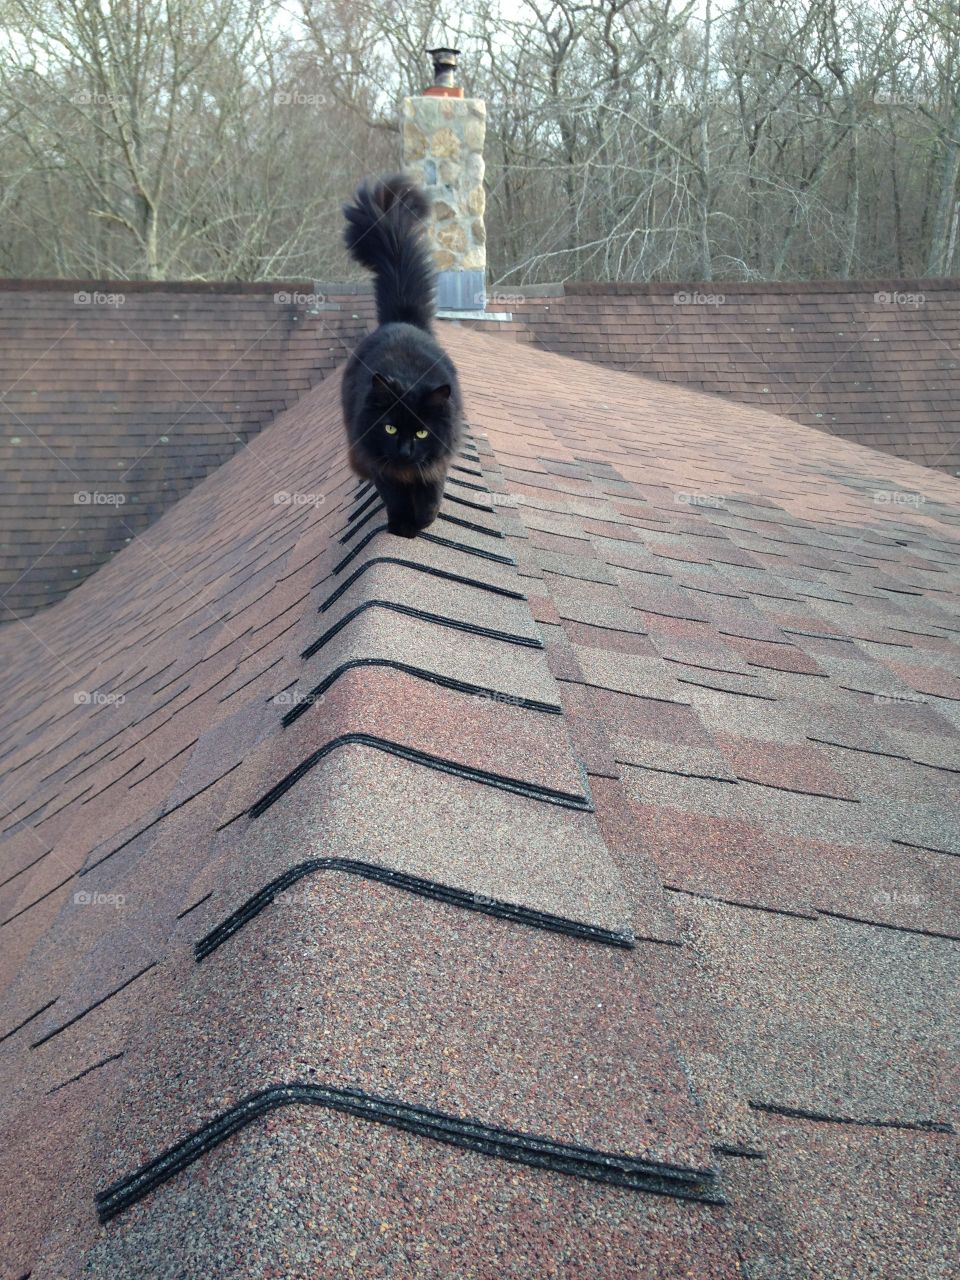 Adventure . I let my indoor cat out to explore the roof 